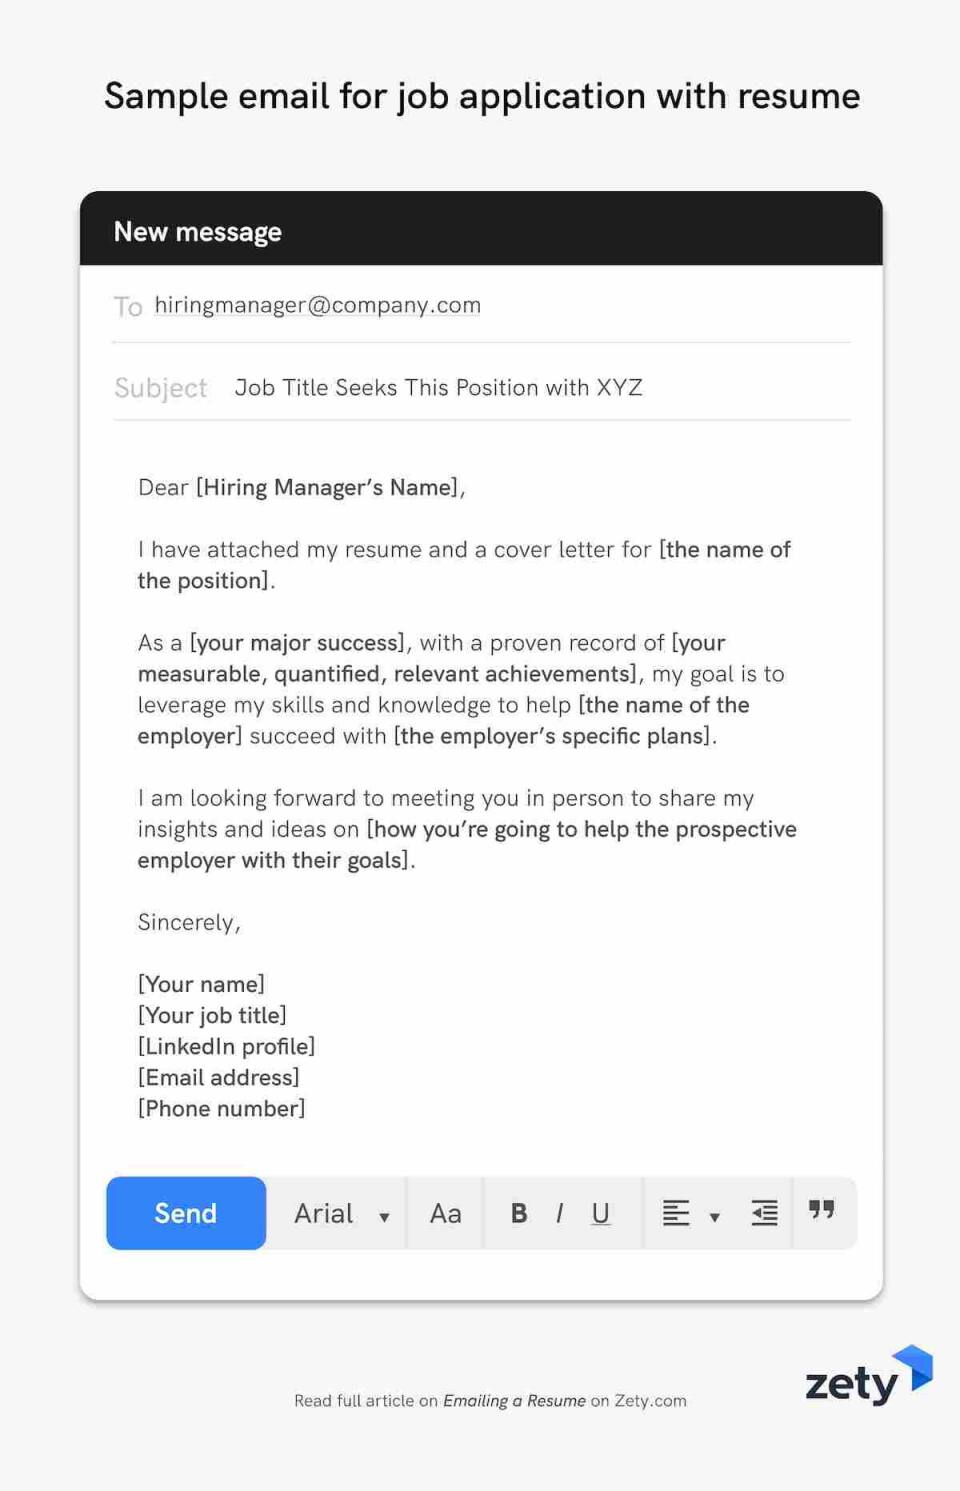 Emailing a Resume: 19+ Job Application Email Samples